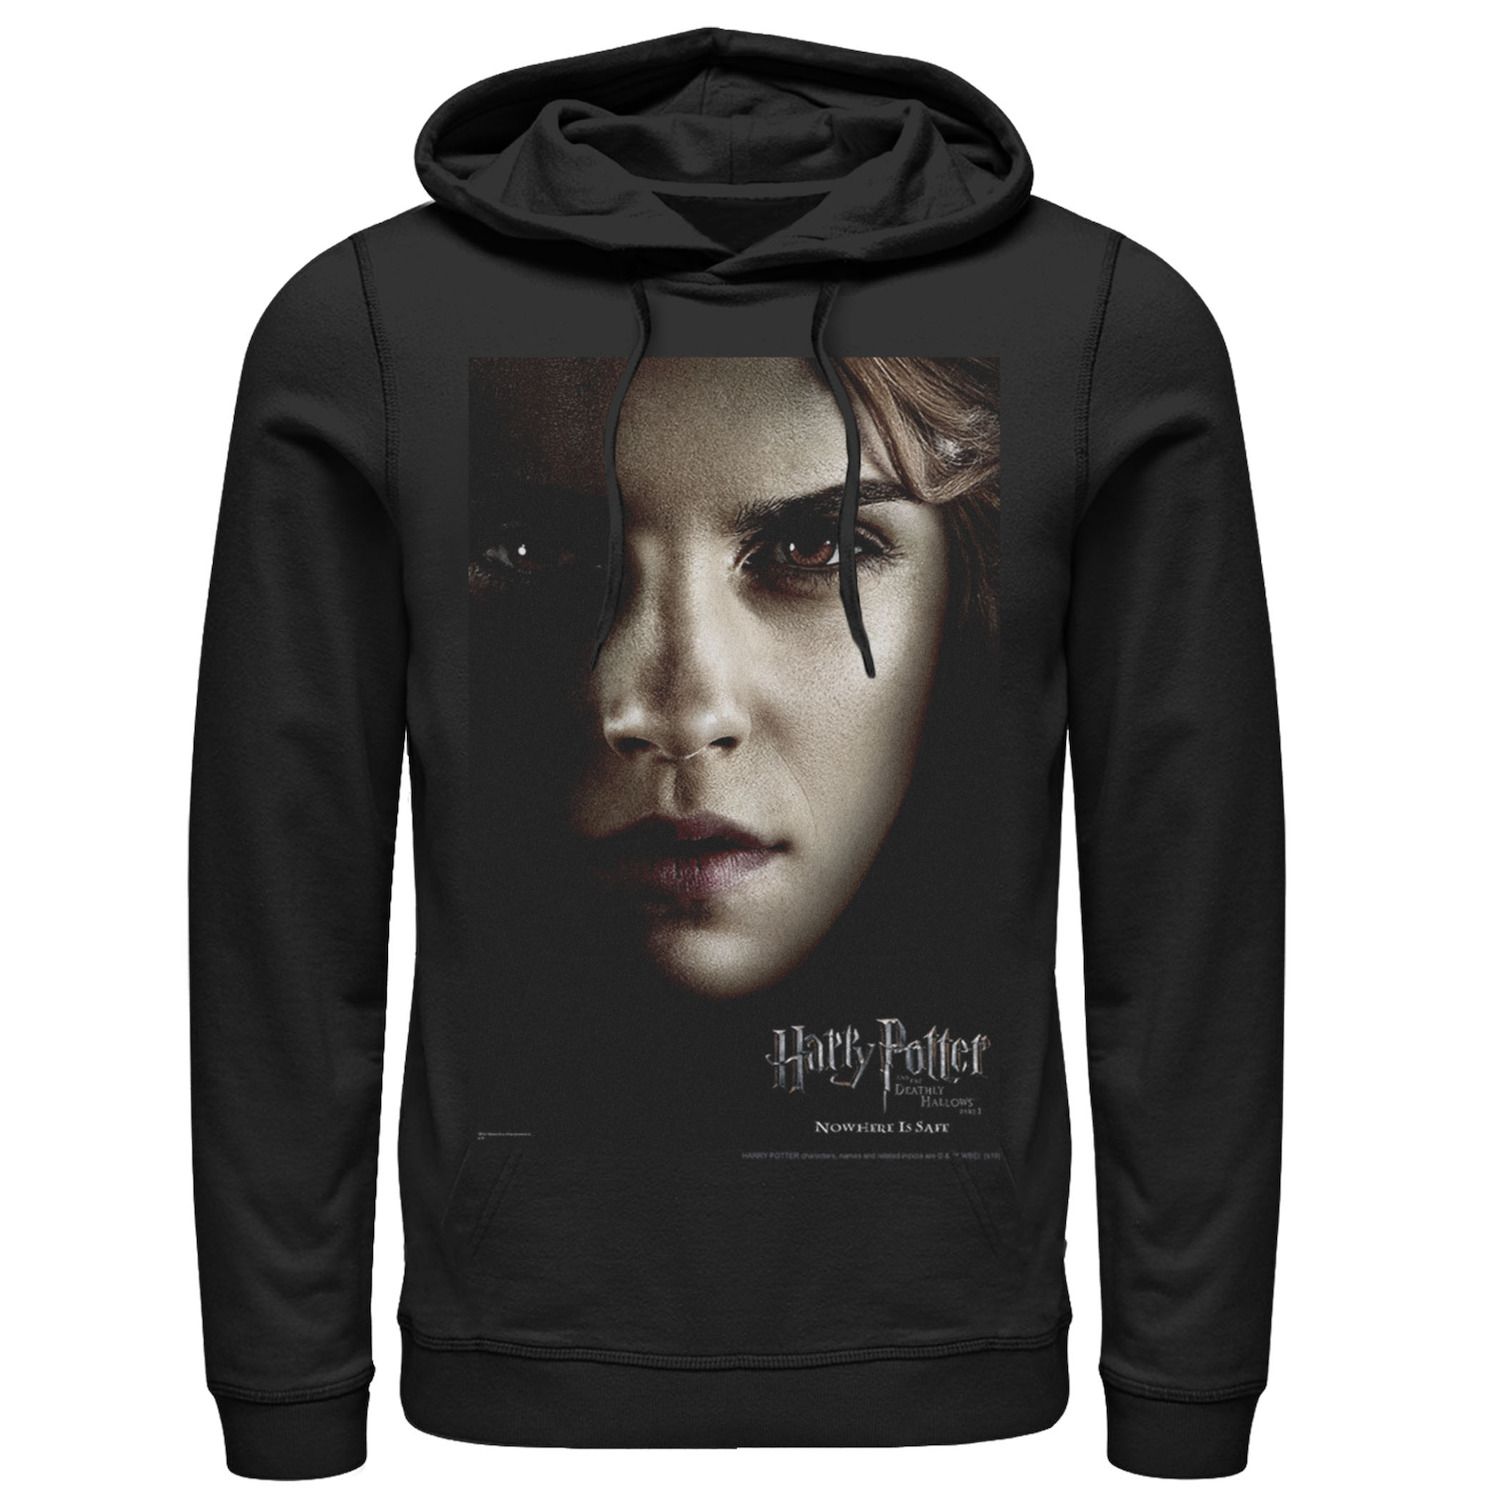 Image for Harry Potter Men's Deathly Hallows Hermione Character Poster Graphic Pullover Hoodie at Kohl's.